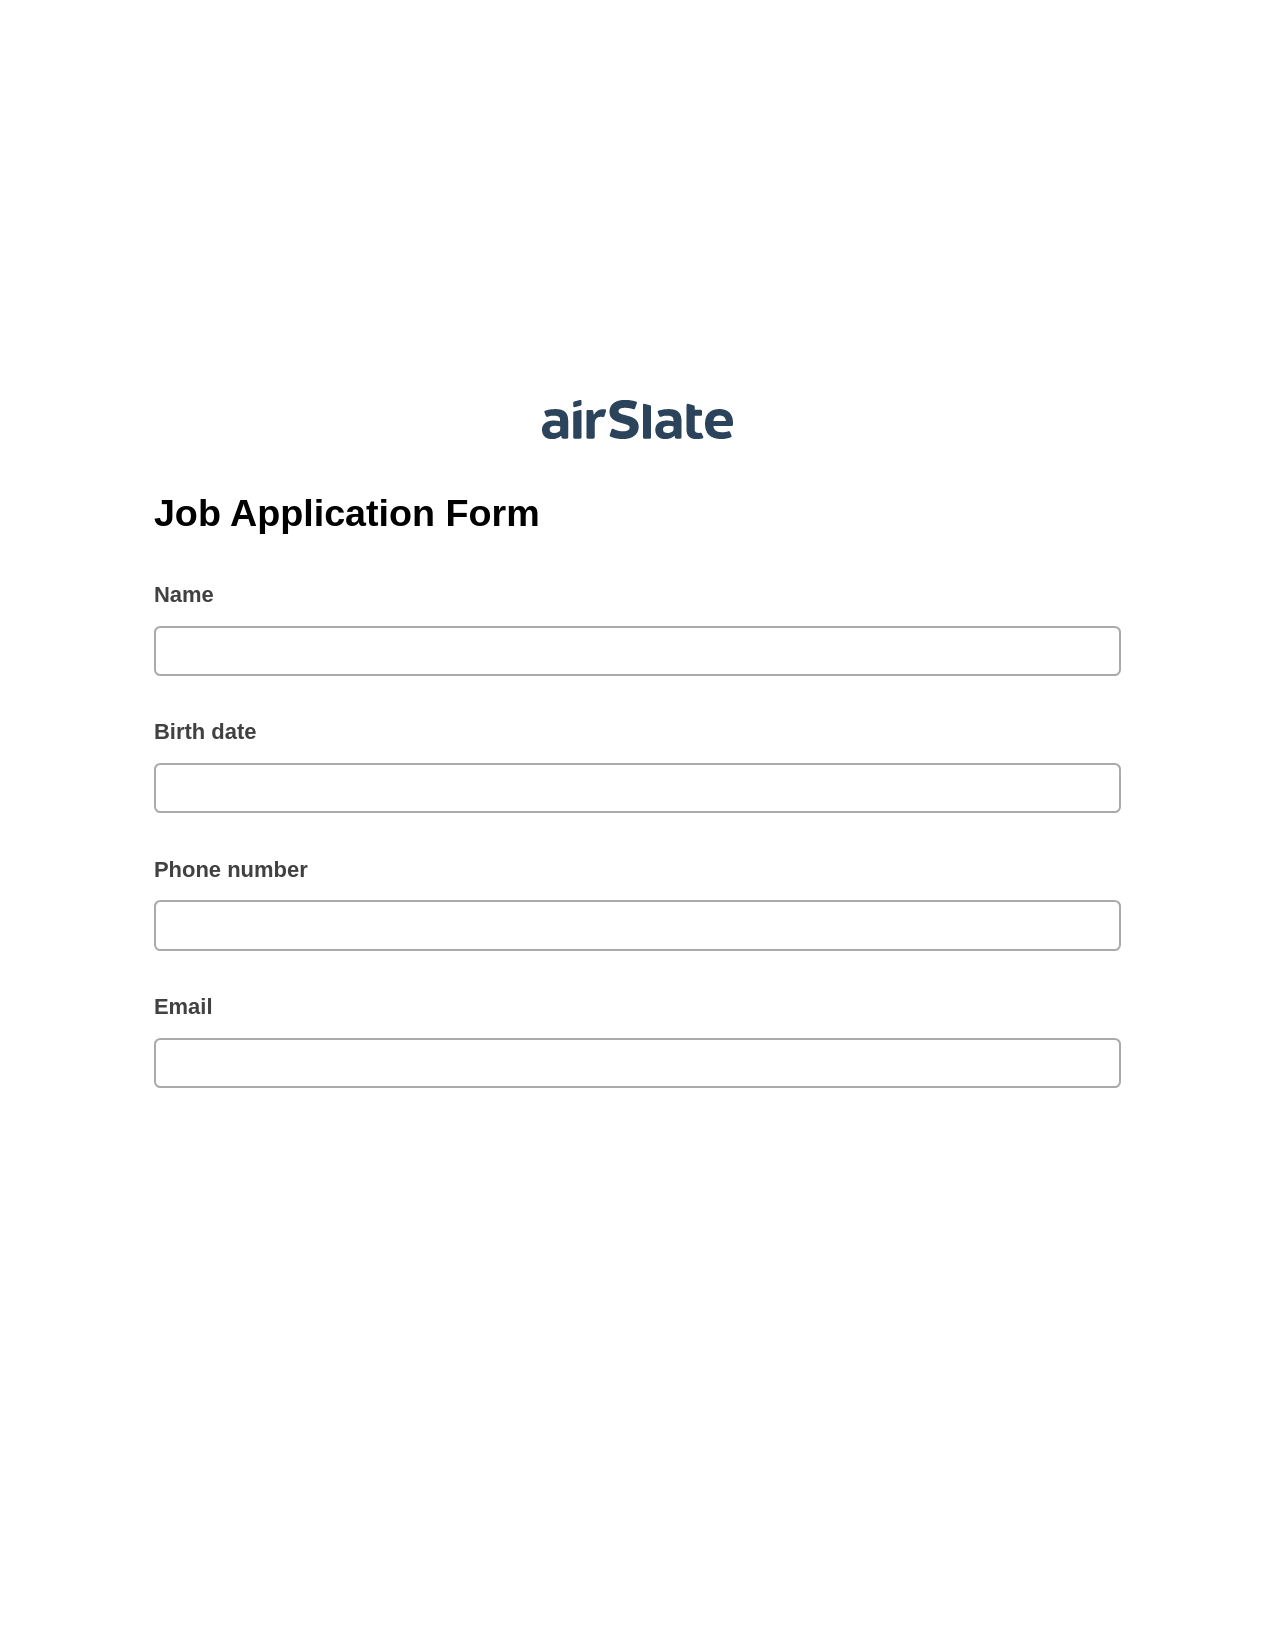 Job Application Form Pre-fill Dropdown from Airtable, Create MS Dynamics 365 Records Bot, Webhook Postfinish Bot